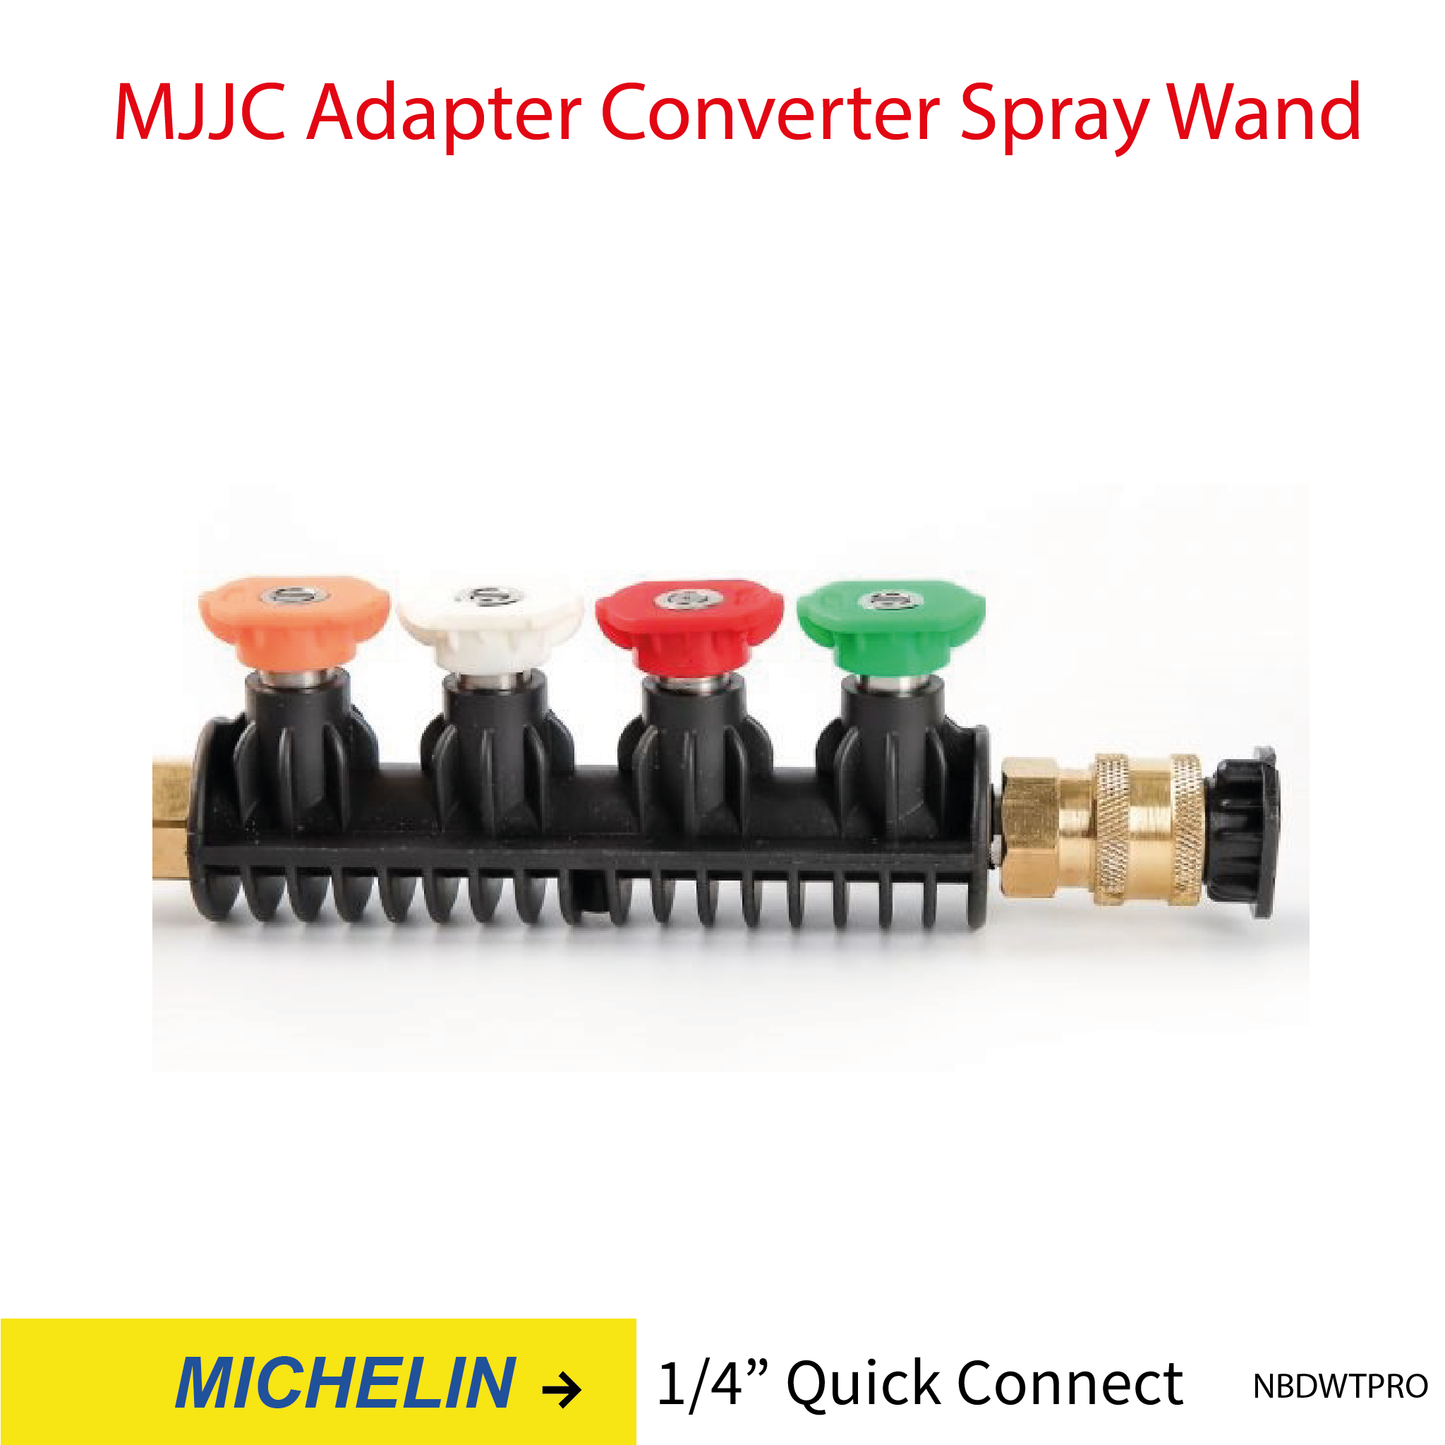 Michelin MJJC Adapter Conversion Converter pressure washer Spray Wand with 5 spray tips